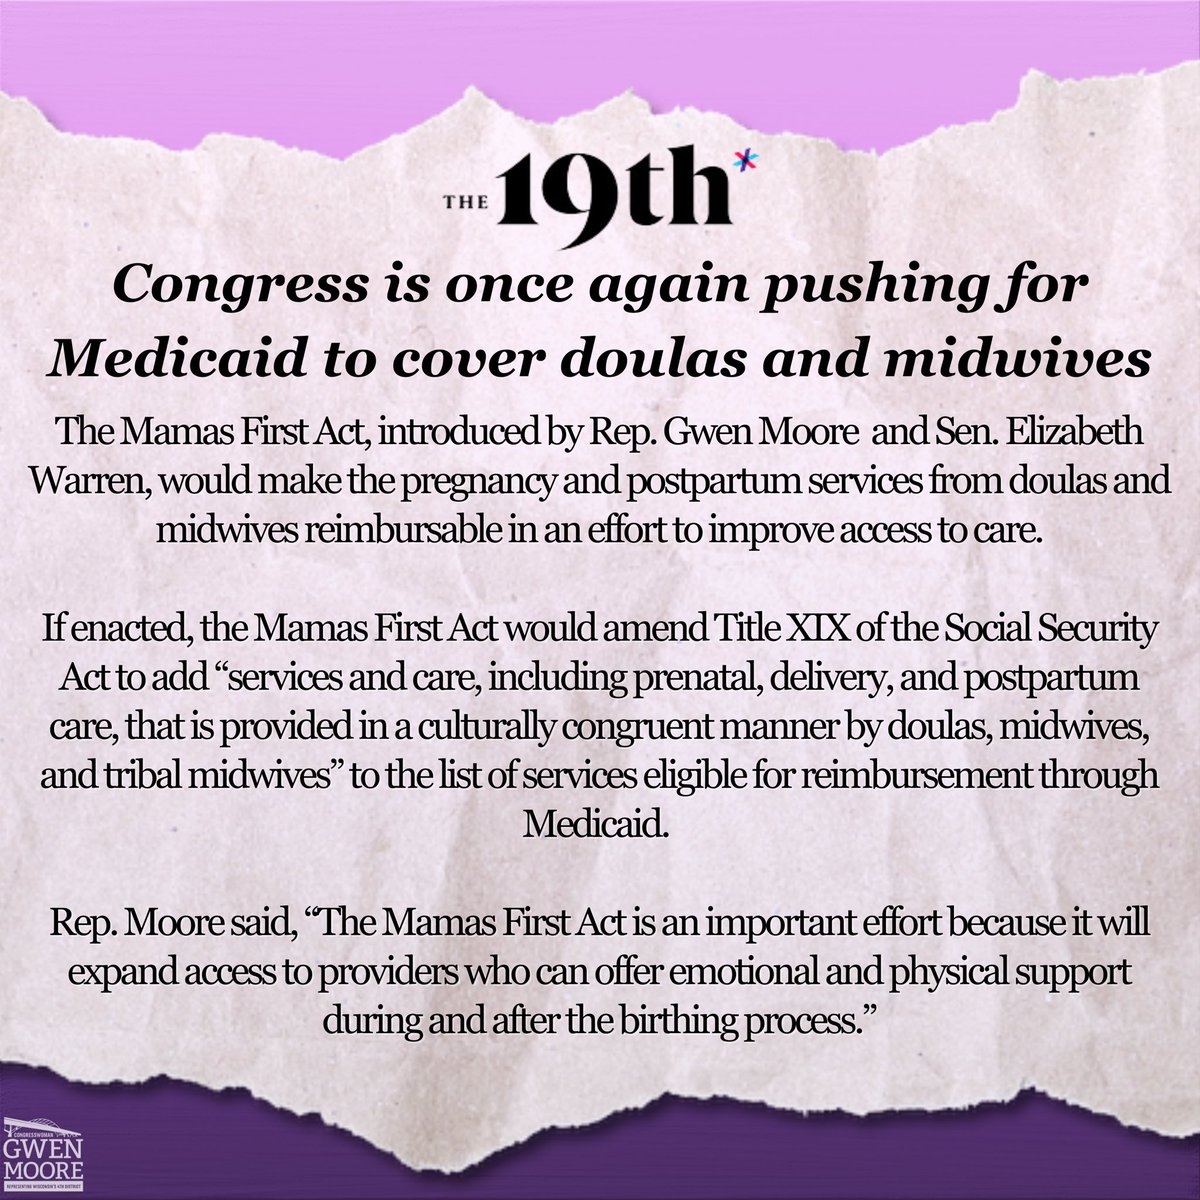 Ahead of Mother’s Day, I’m proud to lead my colleagues w/ @SenWarren’s leadership in the Senate, in the reintroduction of the #MamasFirstAct. This vital legislation expands Medicaid coverage to include doulas & midwives, securing comprehensive care for more Mamas.